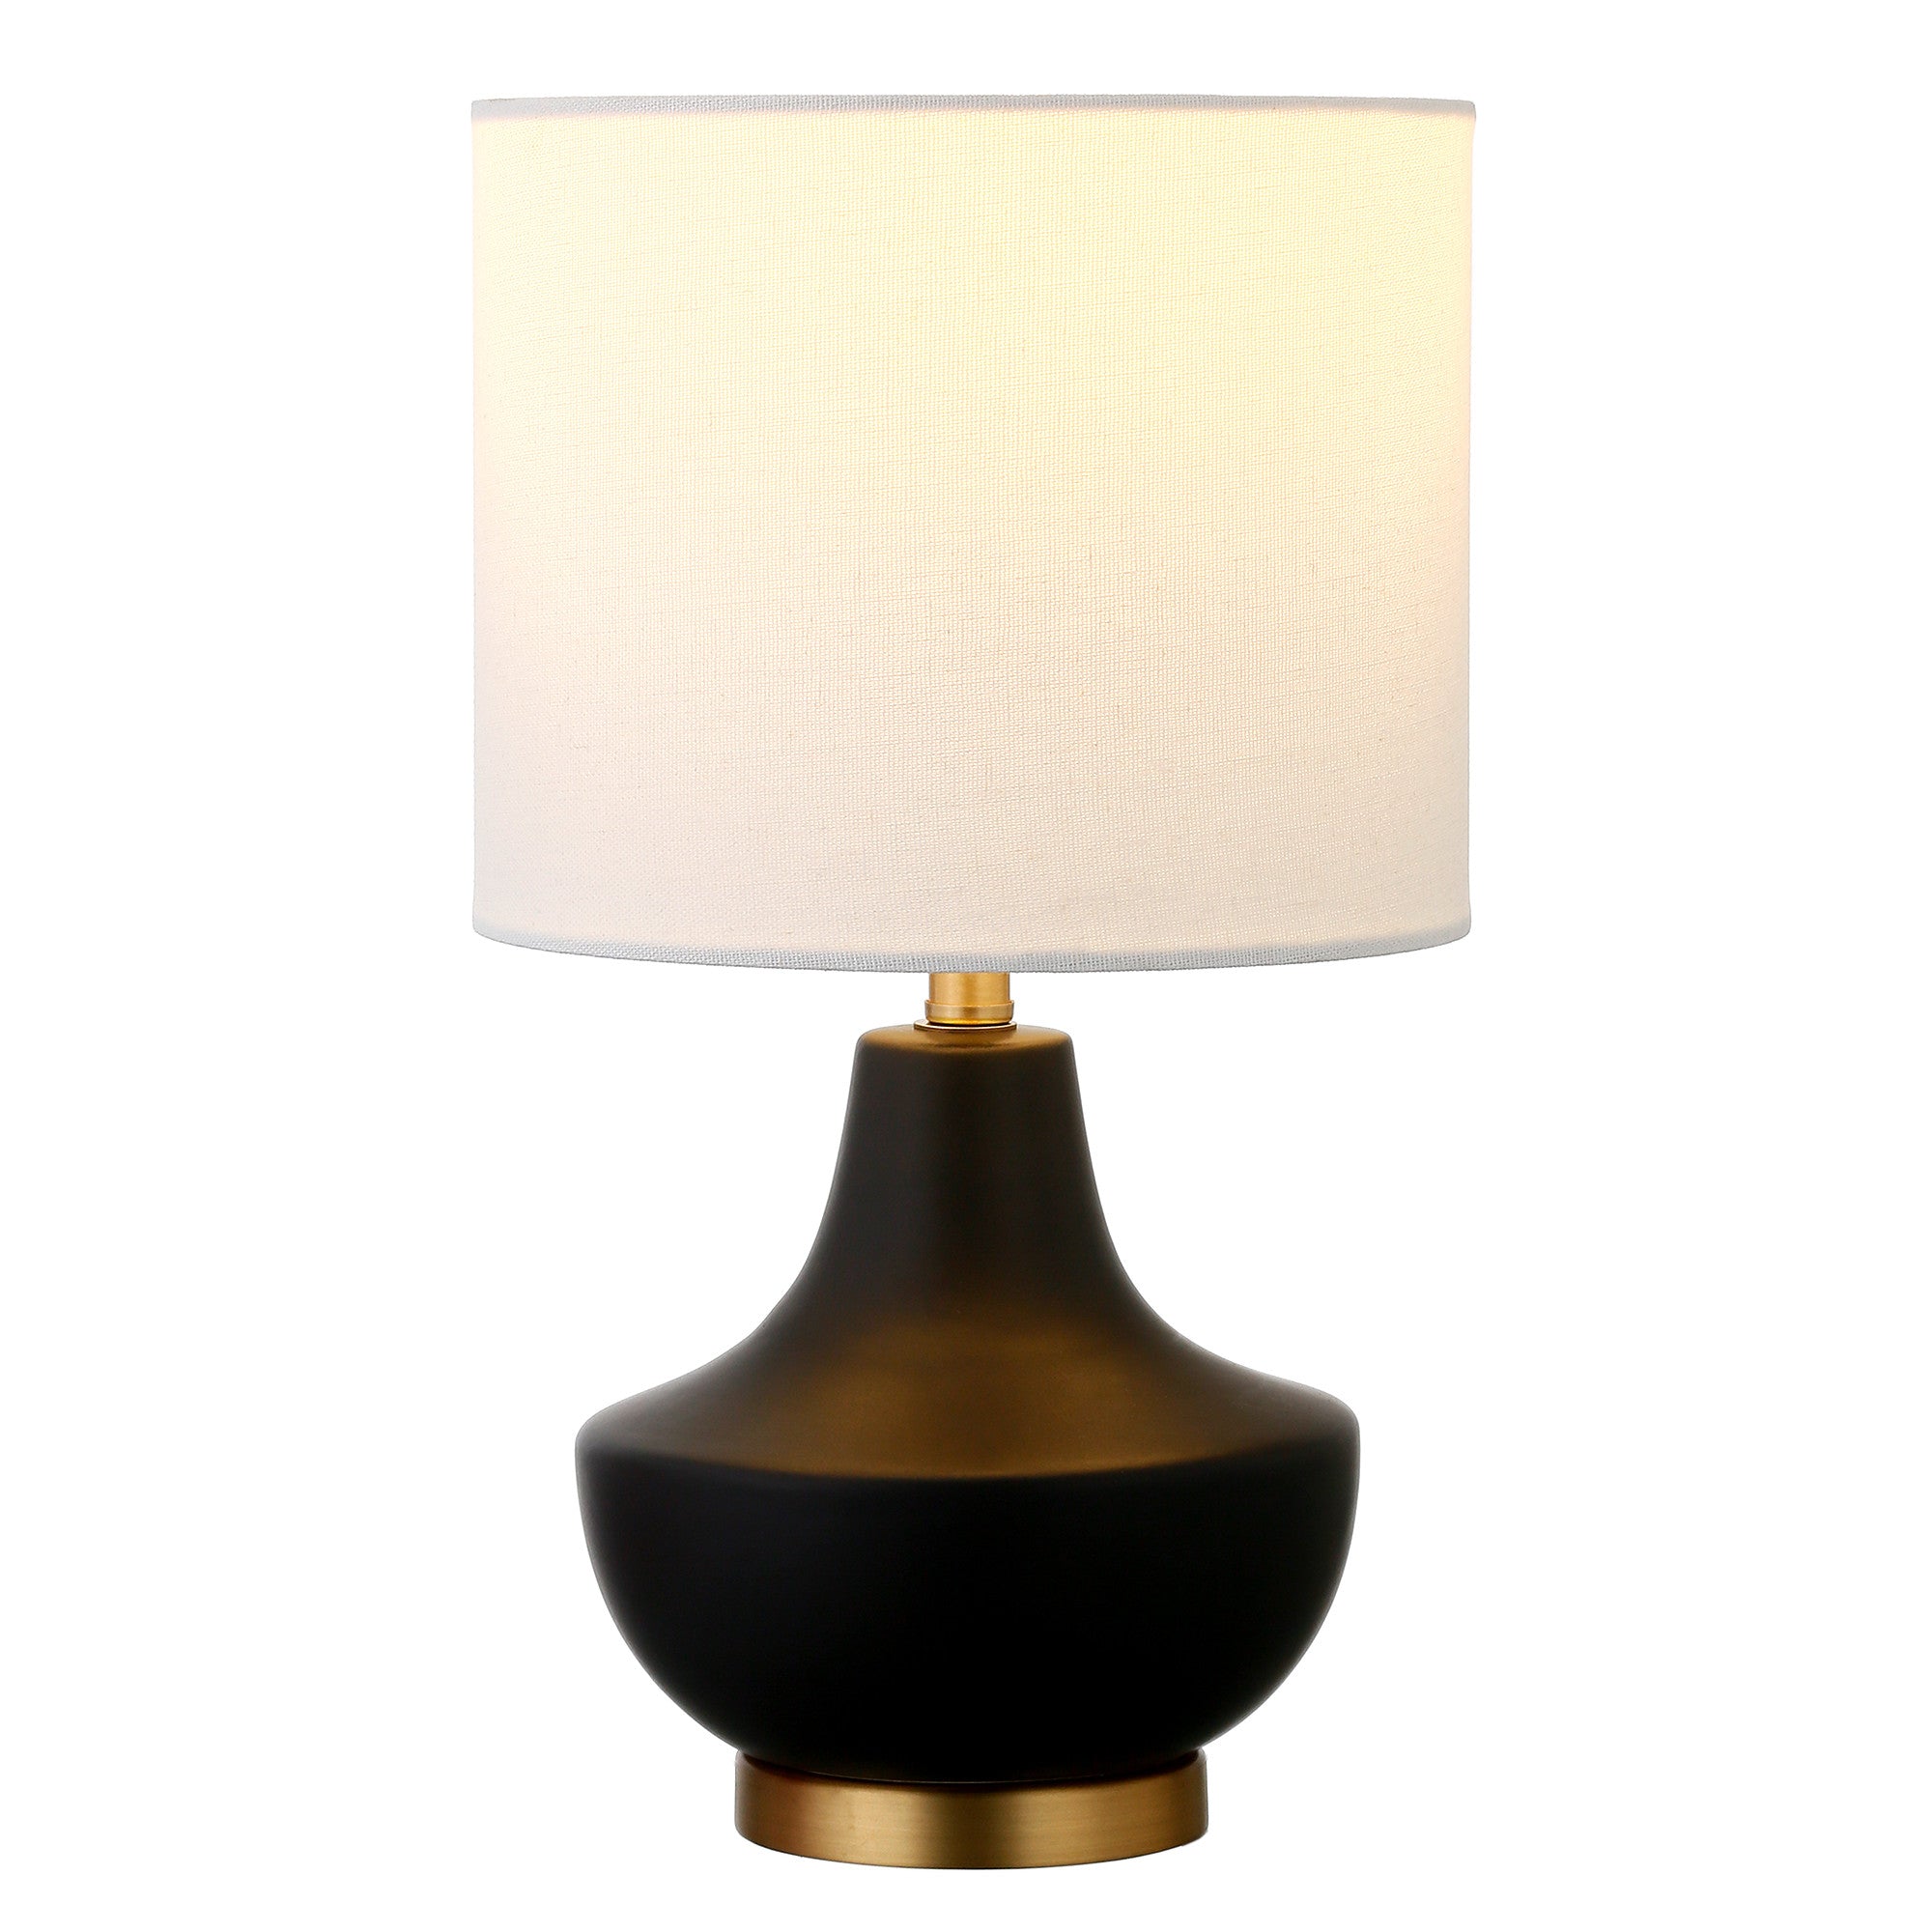 14" Black and Gold Ceramic Urn Table Lamp With White Drum Shade